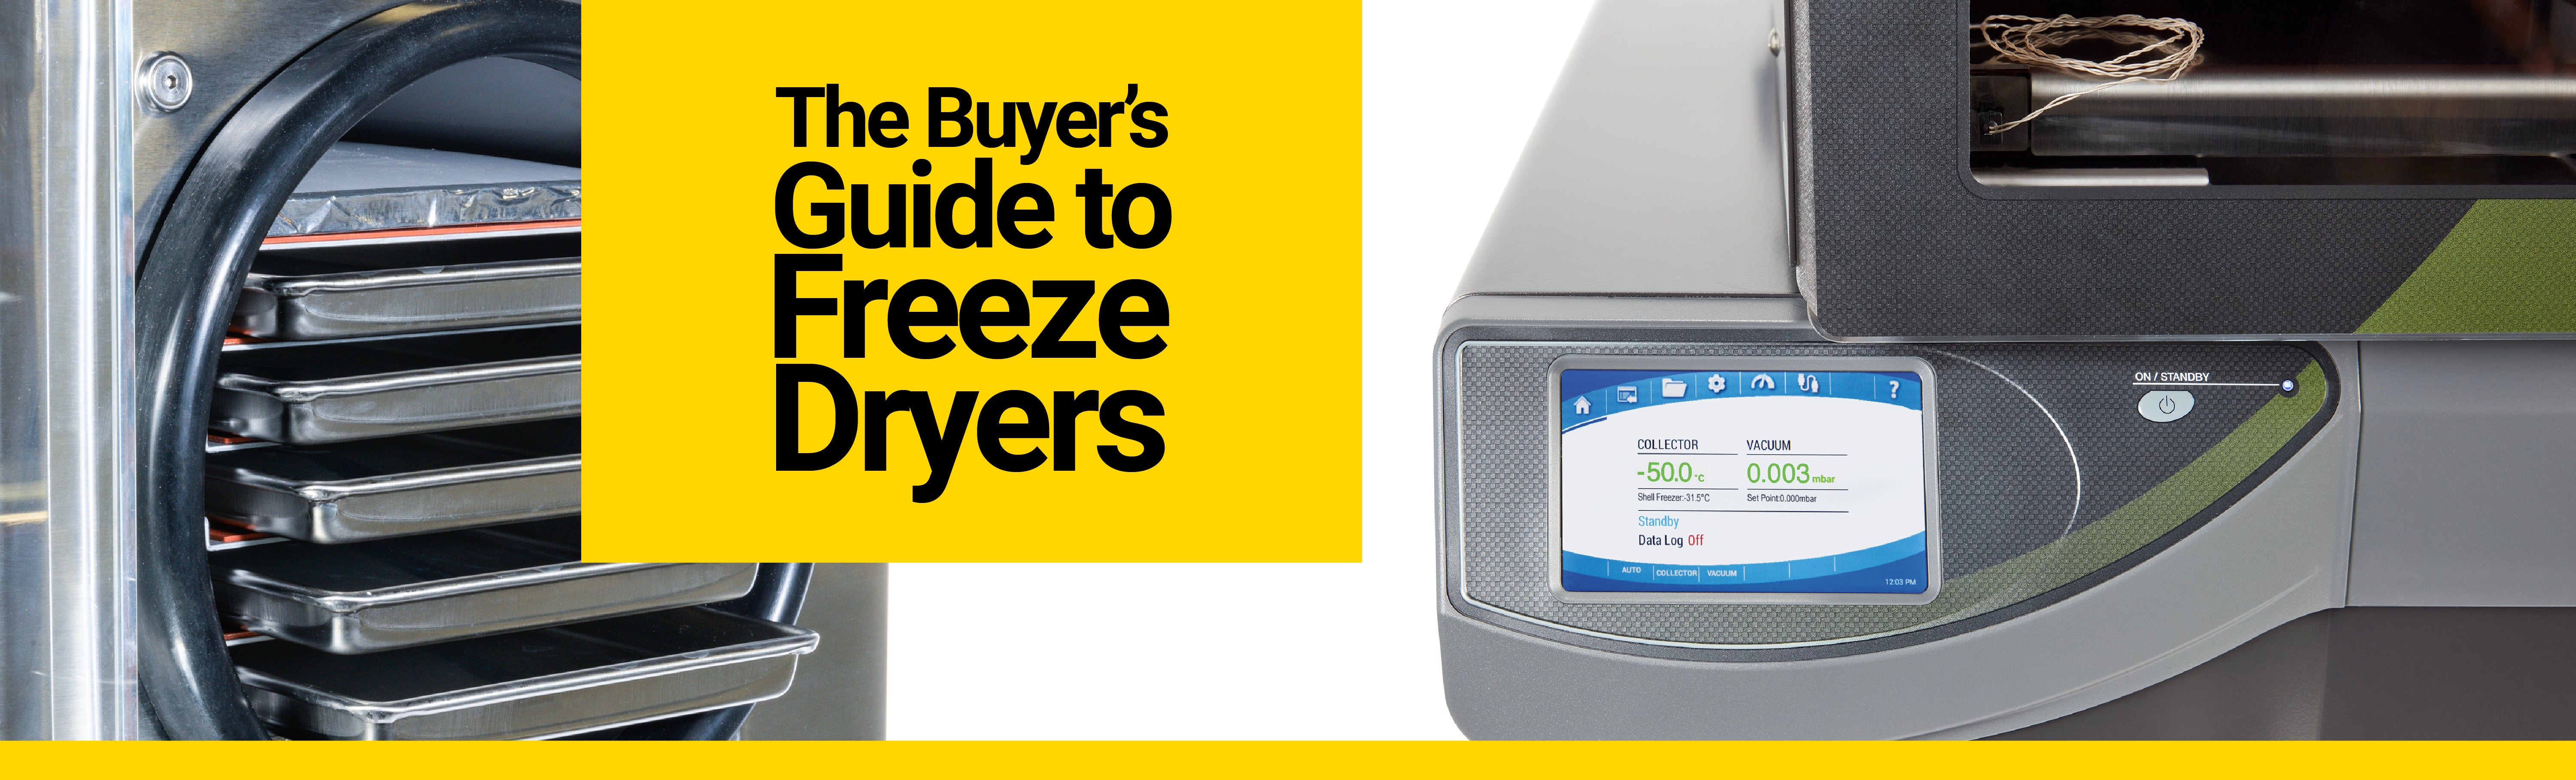 Before You Buy a Freeze Dryer, Read This Guide